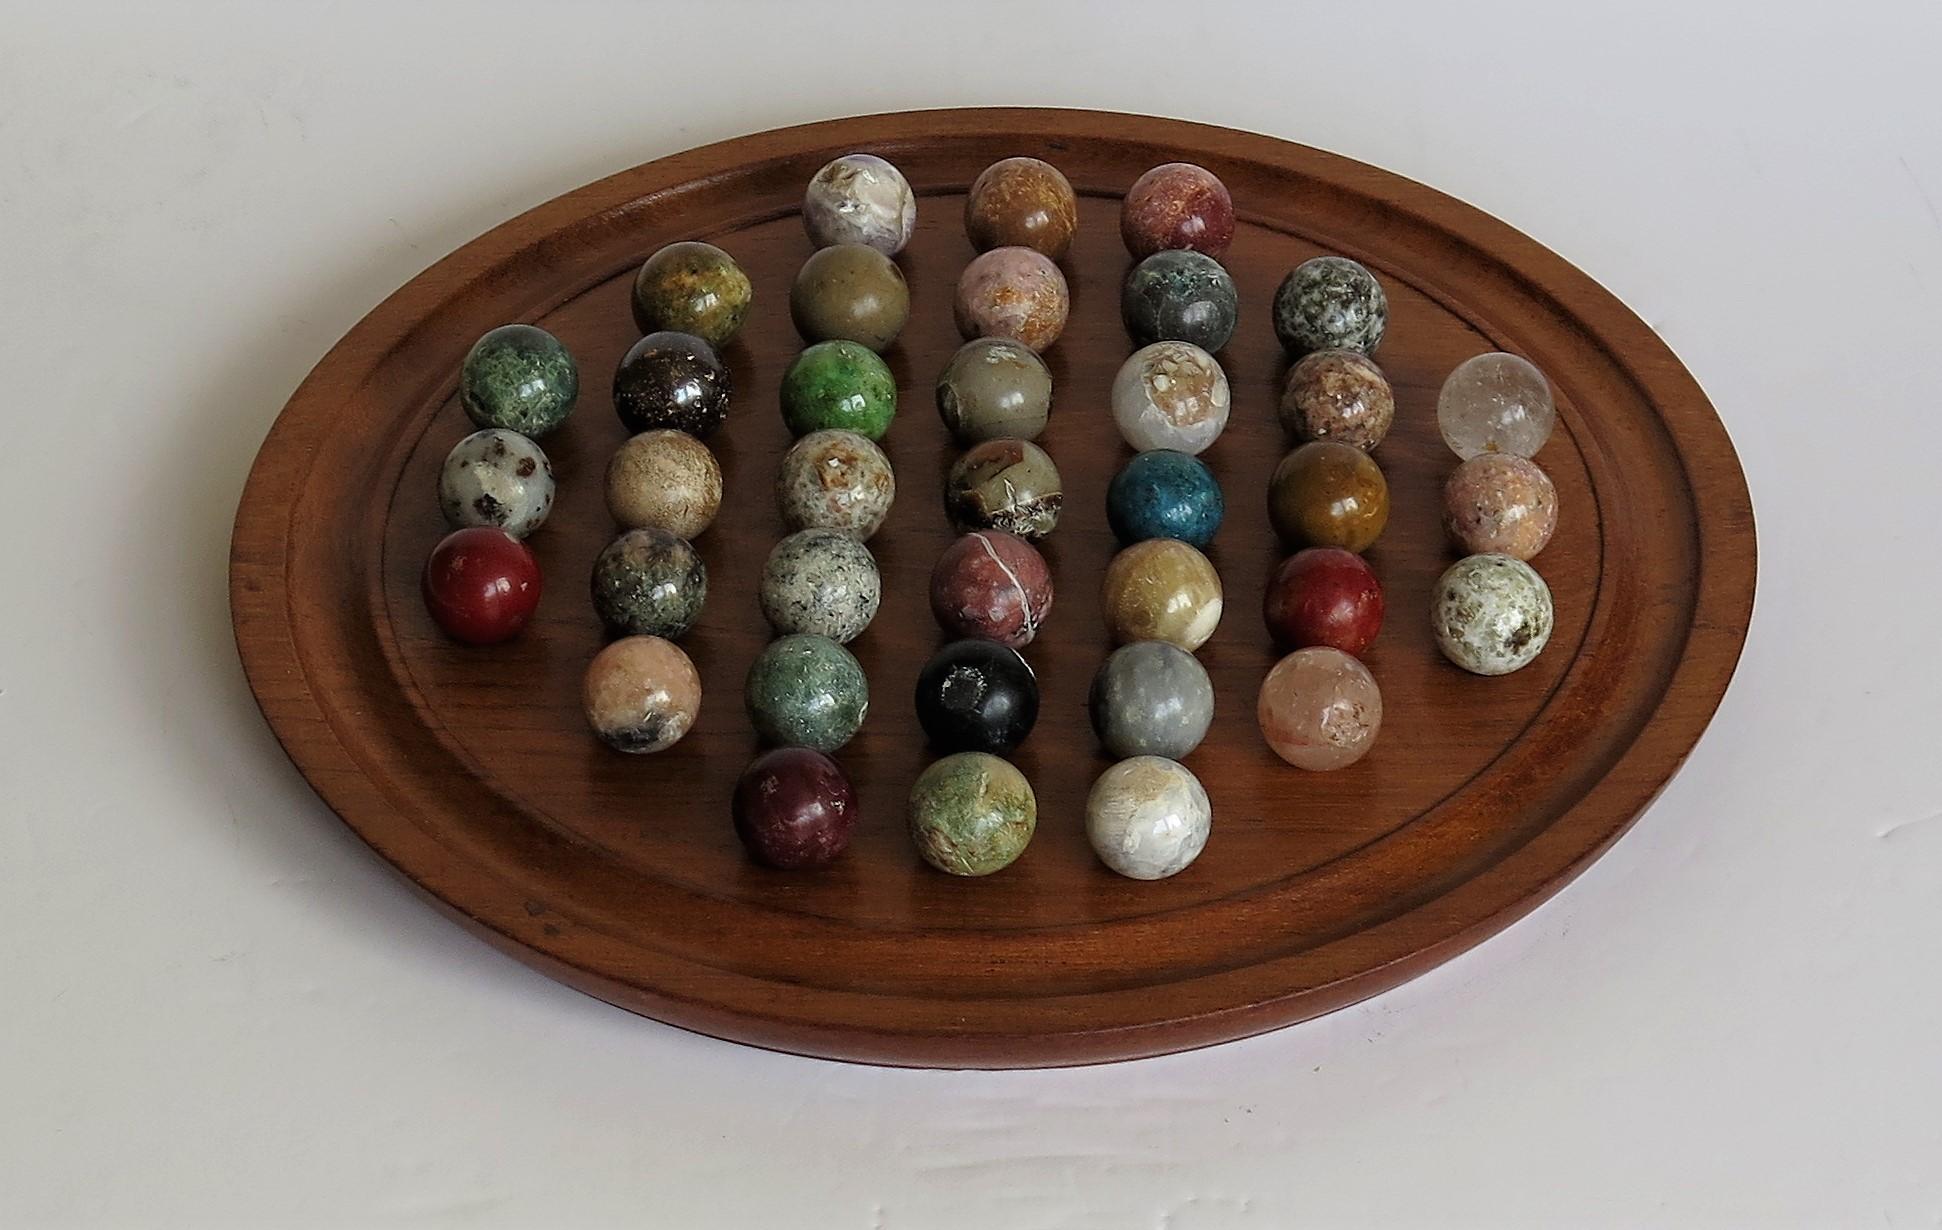 This is a complete board game of 37 hole marble solitaire with a very good 10.5 inch hardwood board and 37 beautiful individual agate mineral stone marbles, which we date to the 20th century, circa 1920 and probably of French origin.

The circular